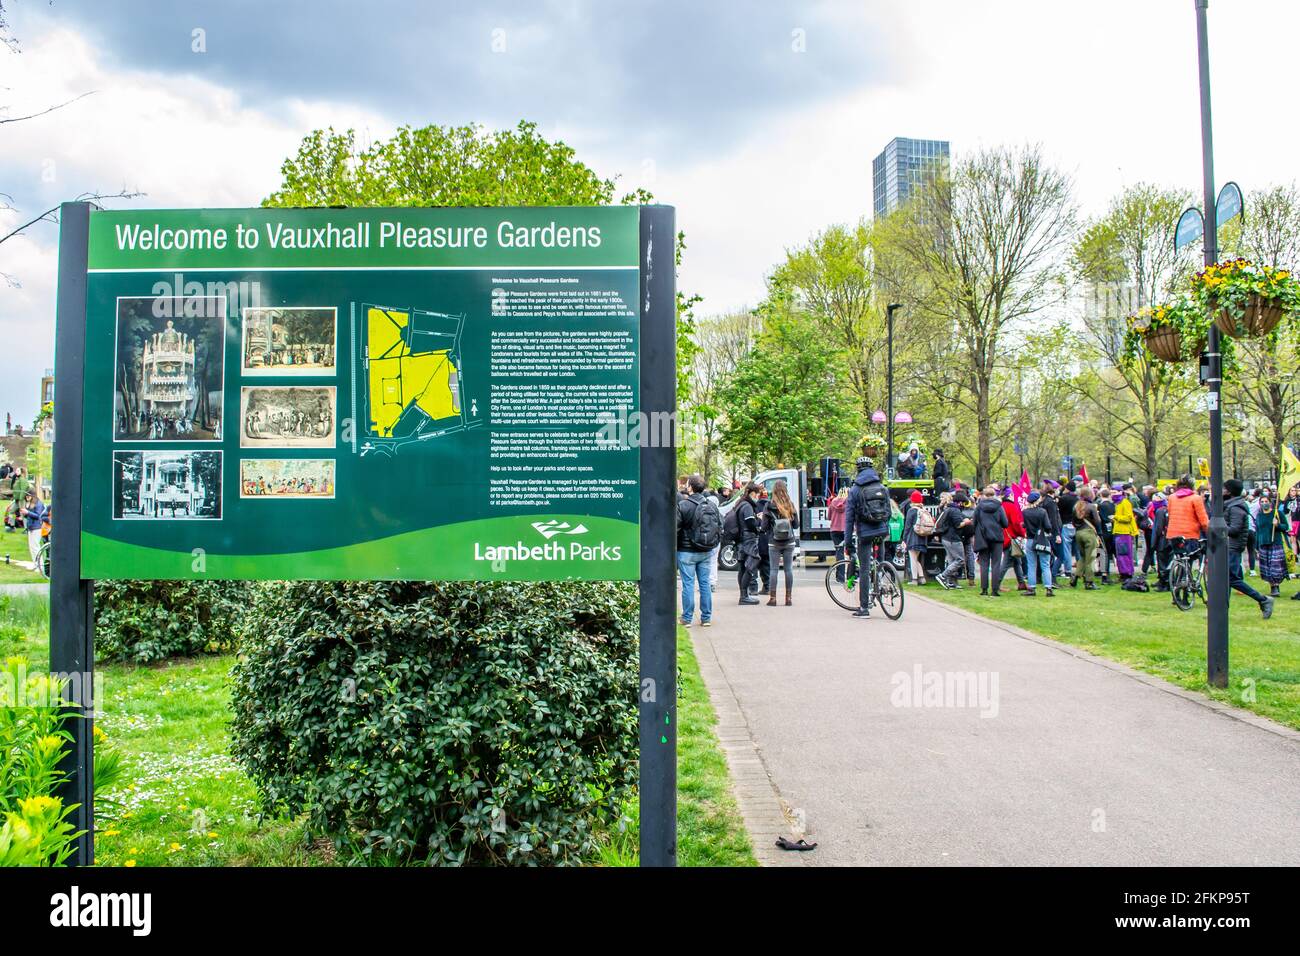 VAUXHALL, LONDON, ENGLAND- 1 May 2021: Vauxhall Pleasure Gardens welcome sign pictured on the day of a KILL THE BILL protest in London Stock Photo